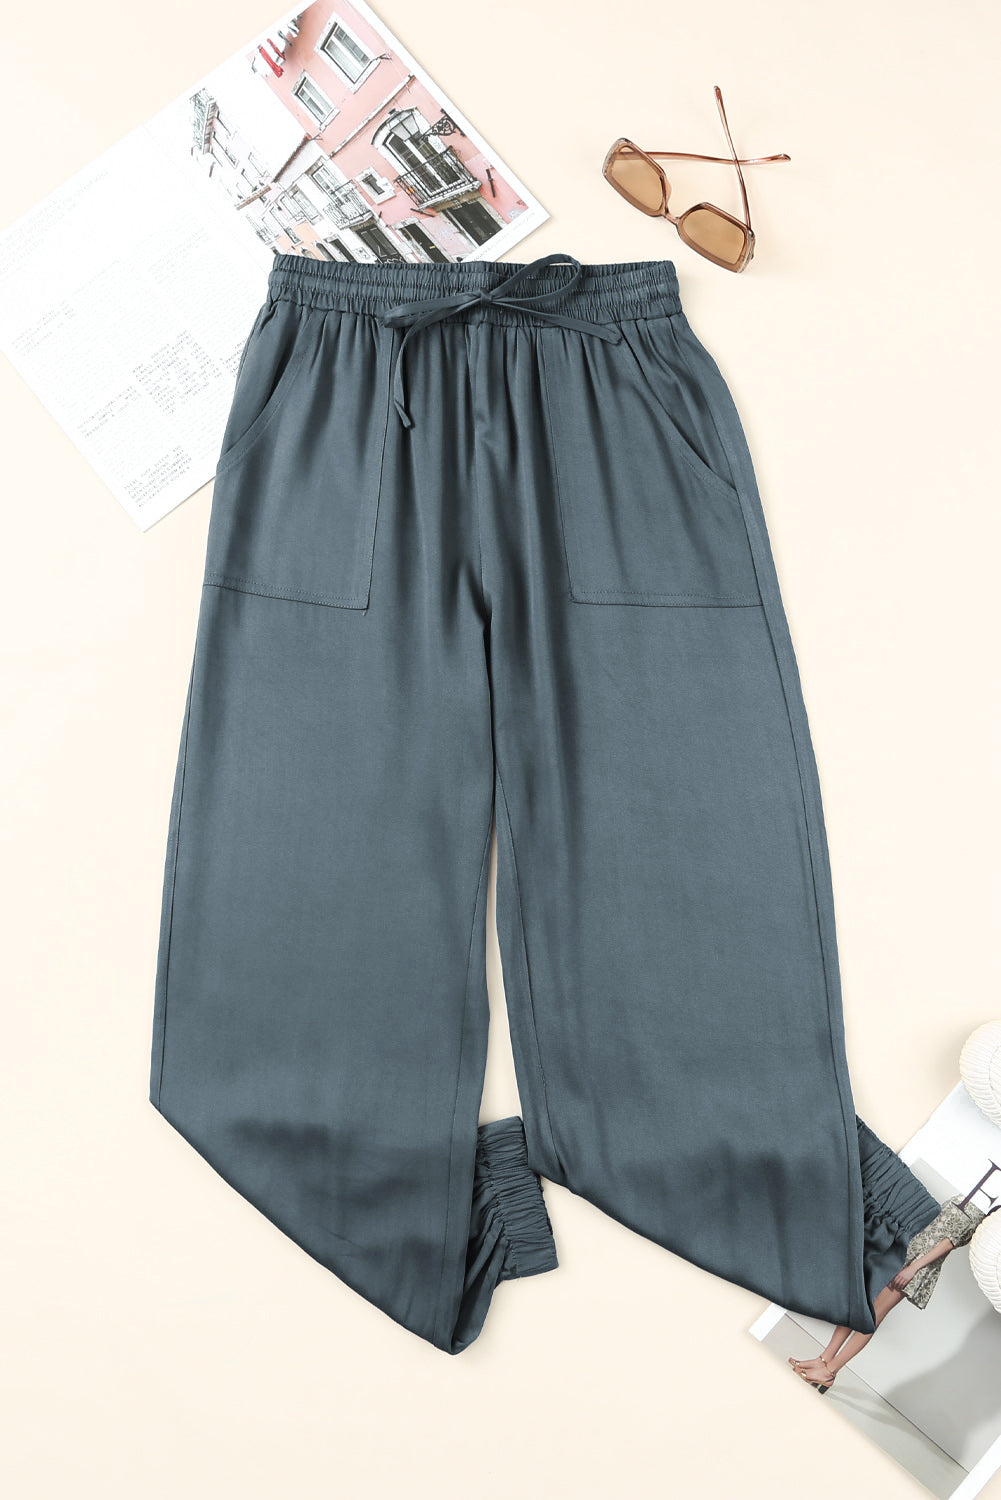 Dim Gray Drawstring Waist Joggers with Pockets Sentient Beauty Fashions Apparel & Accessories